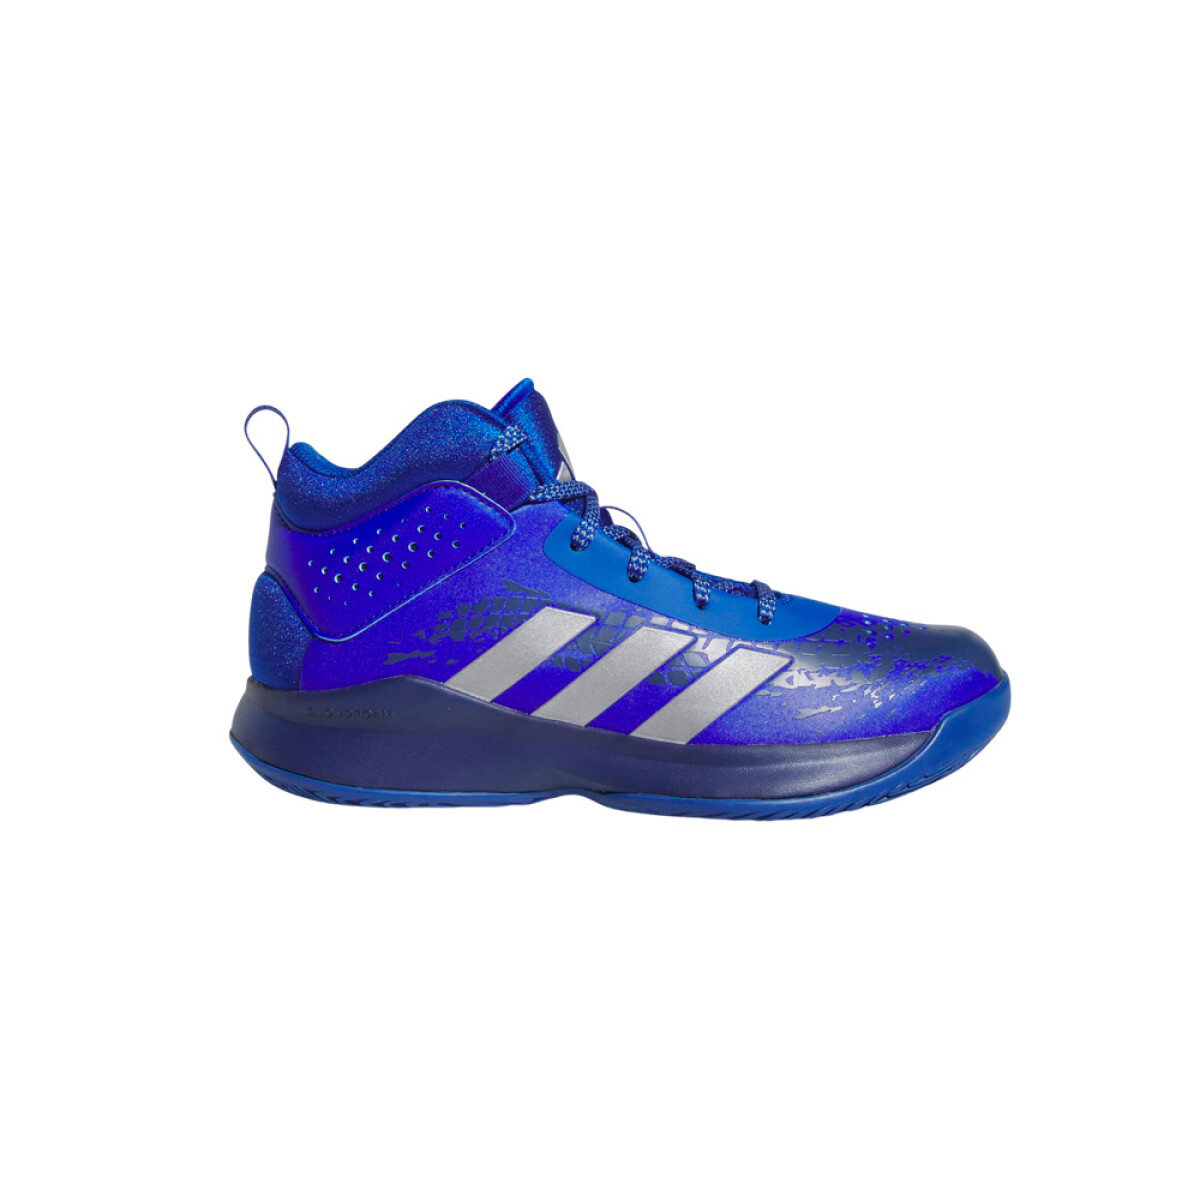 adidas CROSS EM UP 5 SHOES WIDE - Royal Blue / Silver Metallic / Victory Blue 